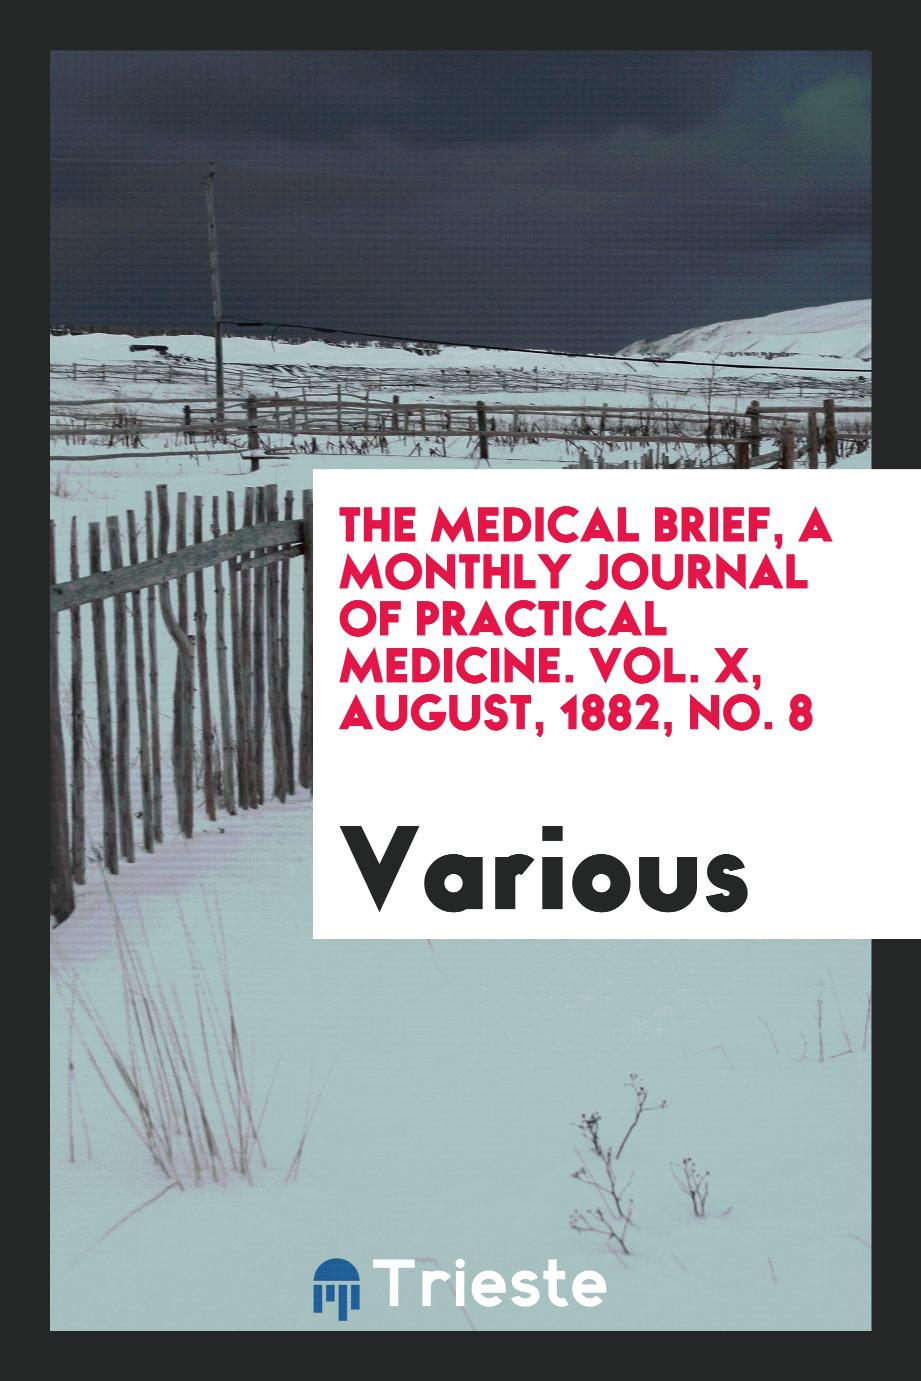 The Medical brief, a monthly journal of practical medicine. Vol. X, August, 1882, No. 8